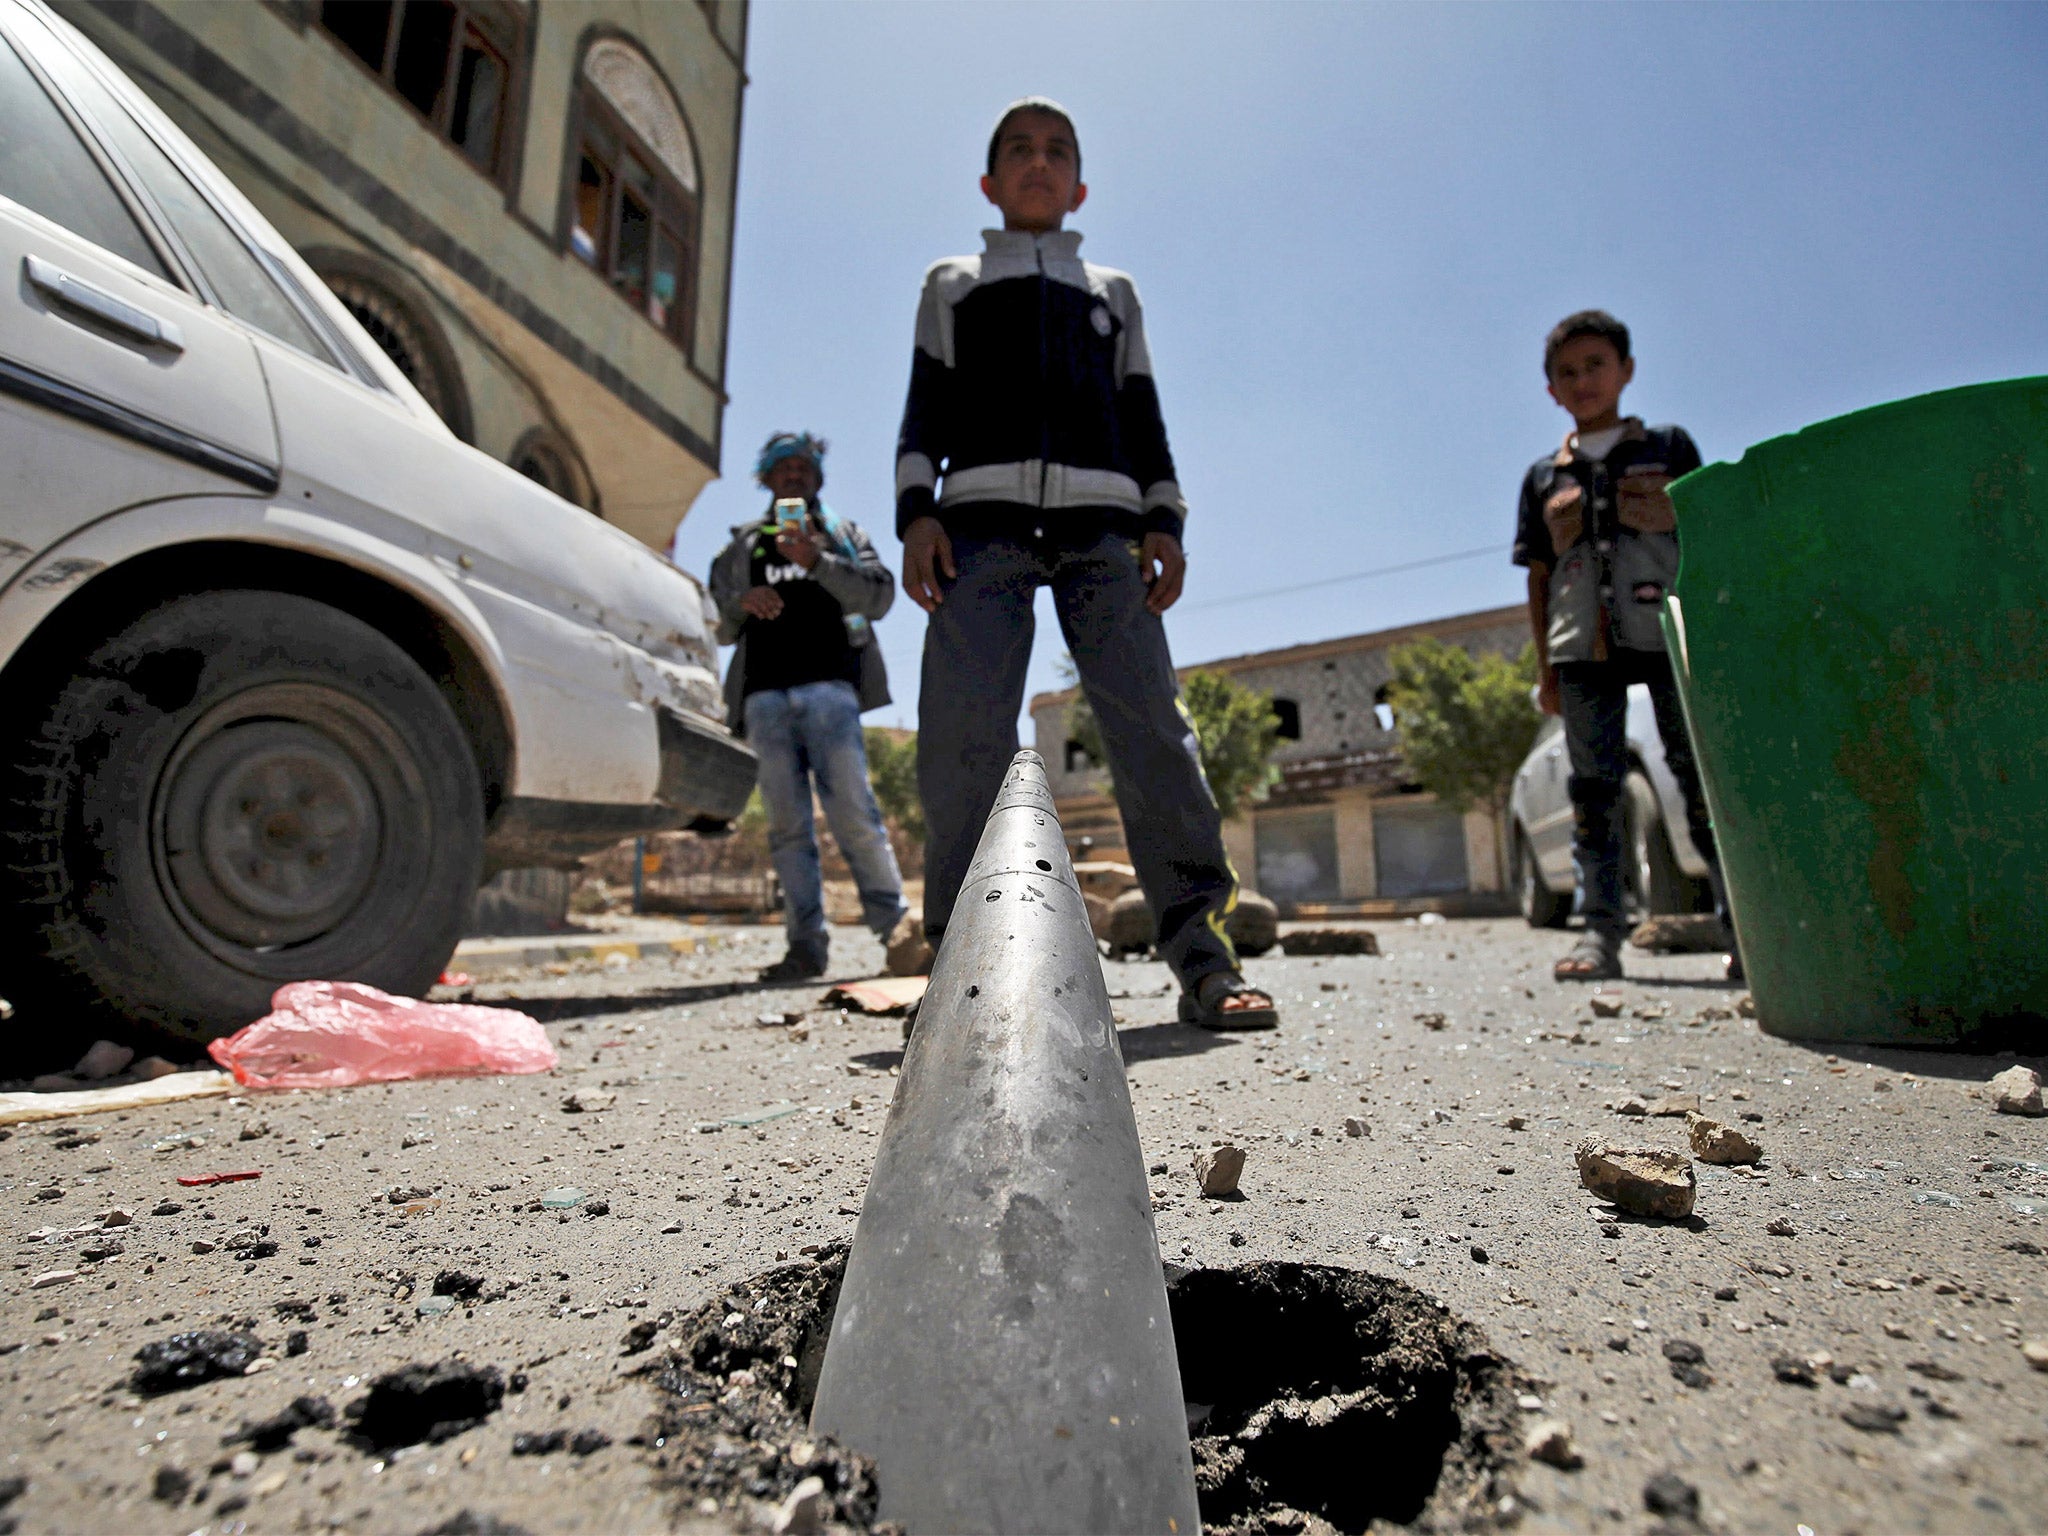 Boys stand in front of a partially buried artillery shell after an air strike on Sanaa